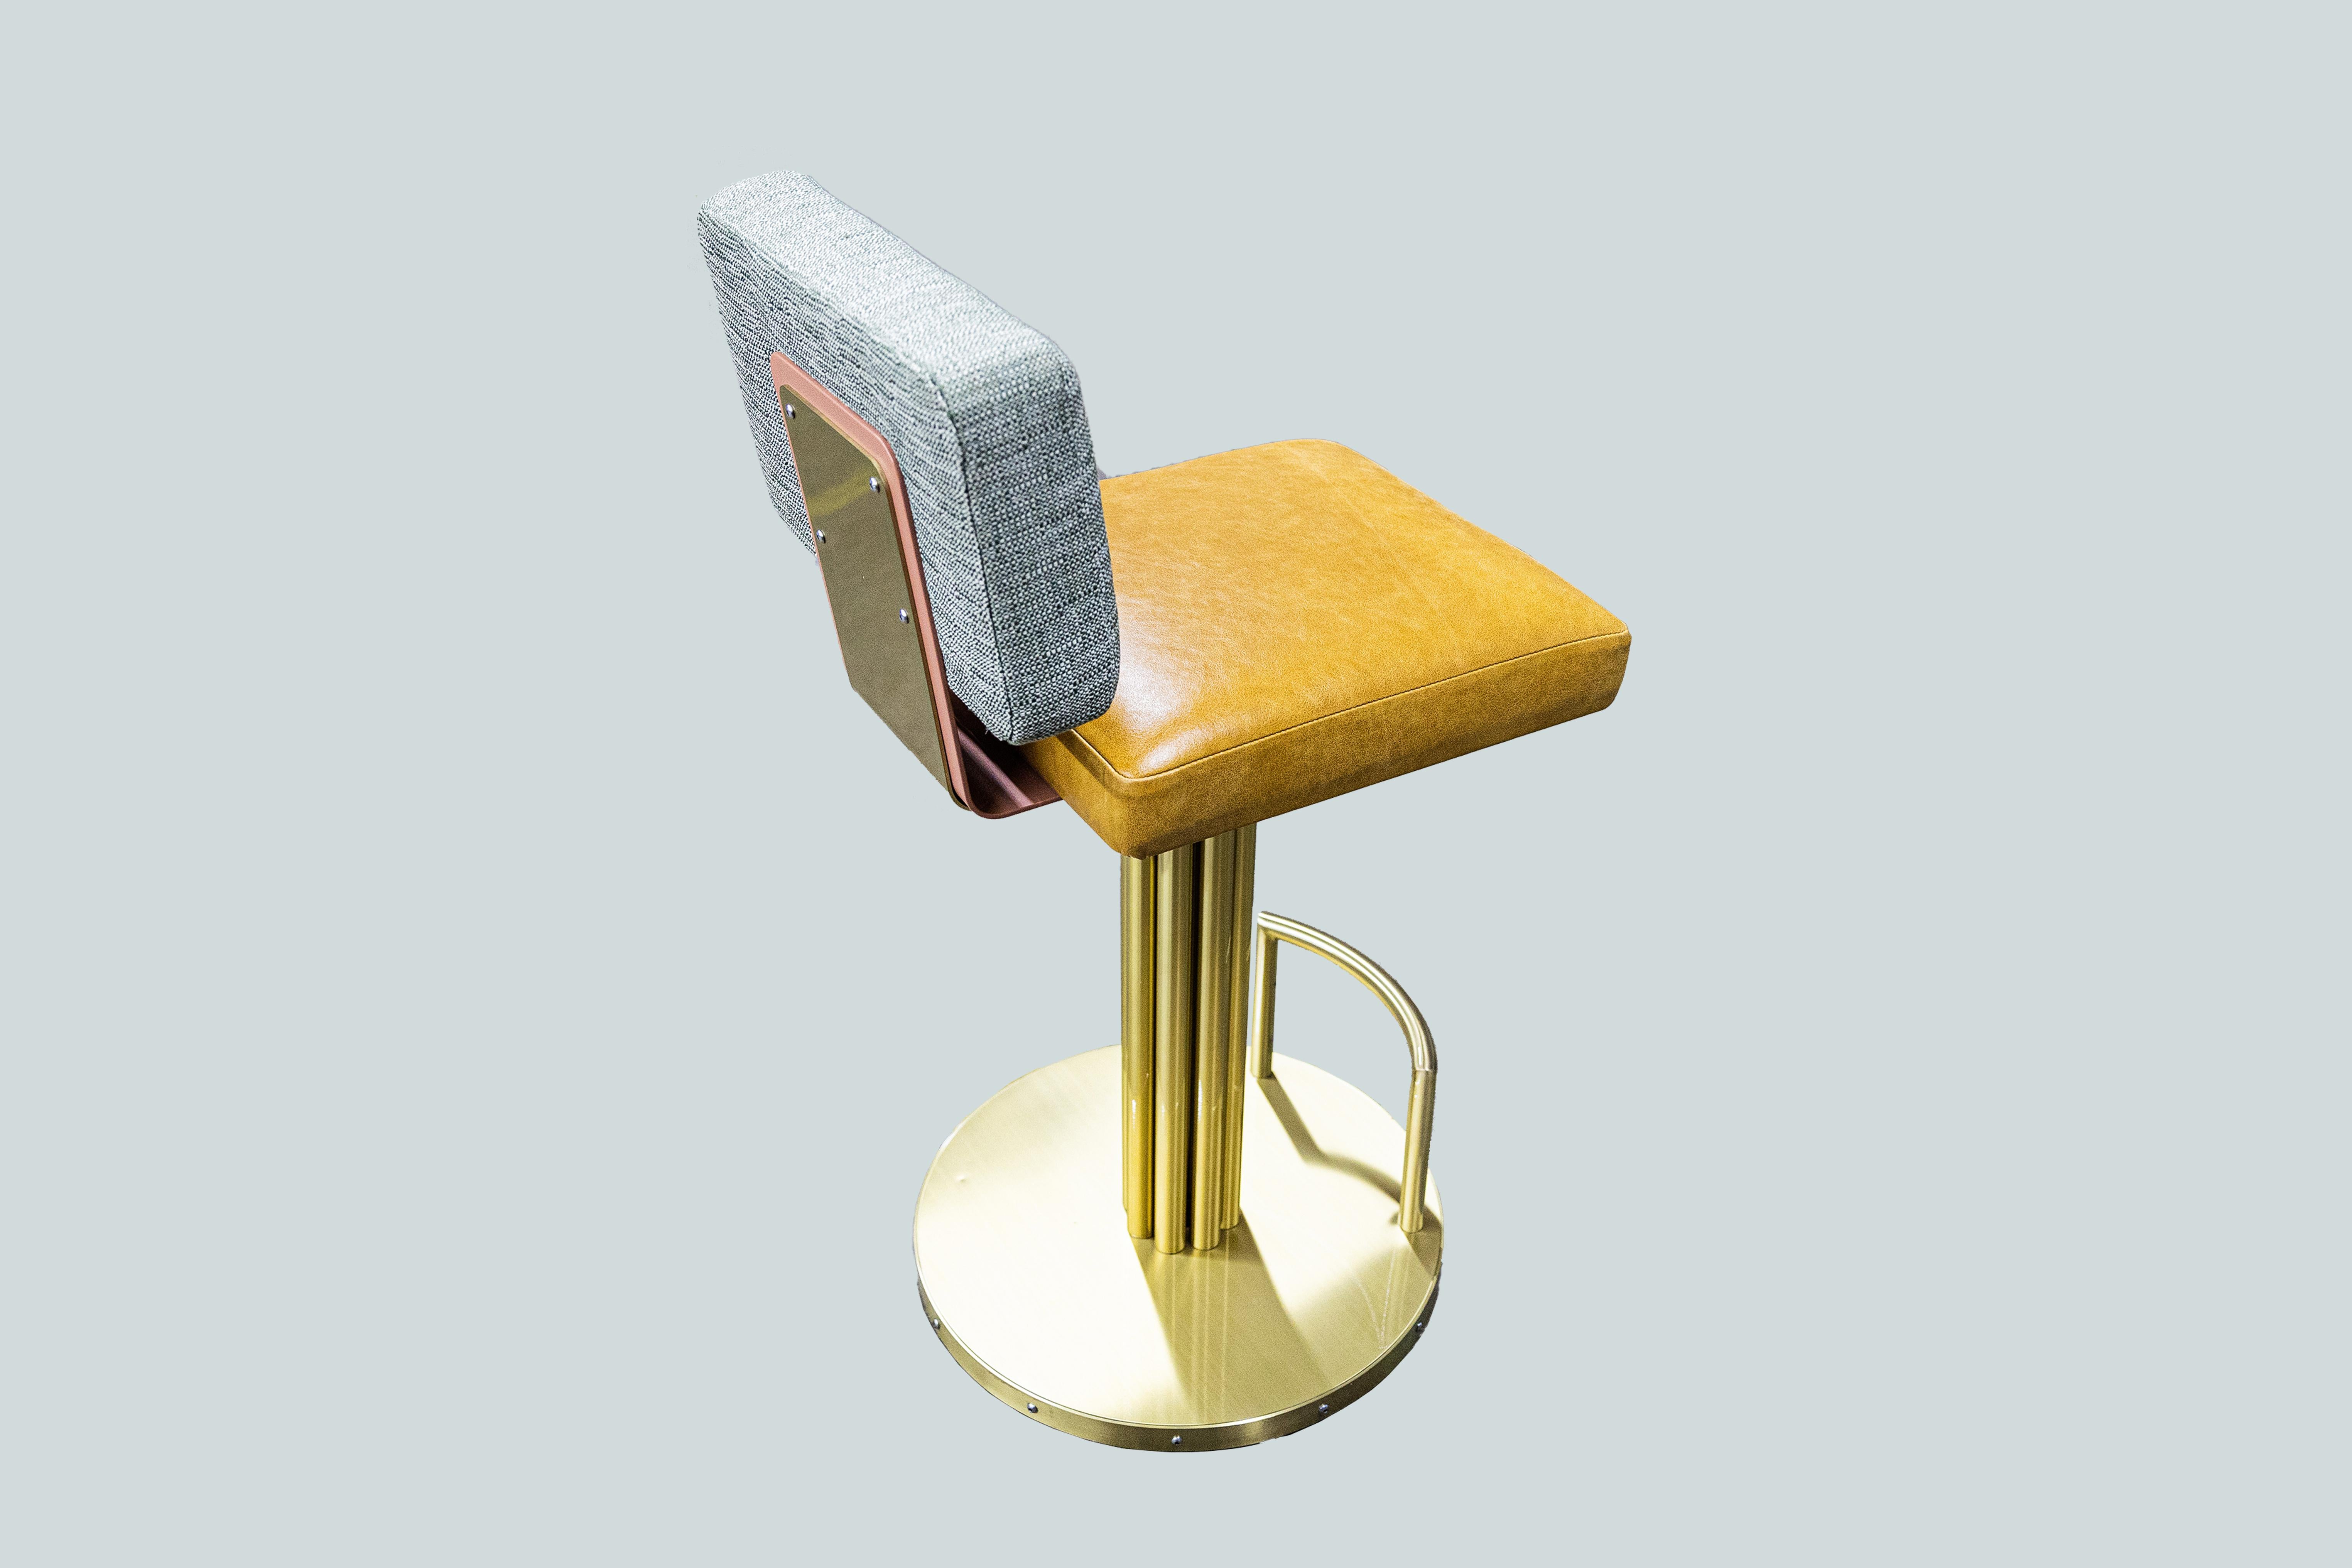 Designed by Basile Built, renowned Design-Fabrication Studio based in San Diego, California, this upholstered bar stool joins comfort and durability, featuring fabric back, leather seat and brass legs and base for a luxurious look.
